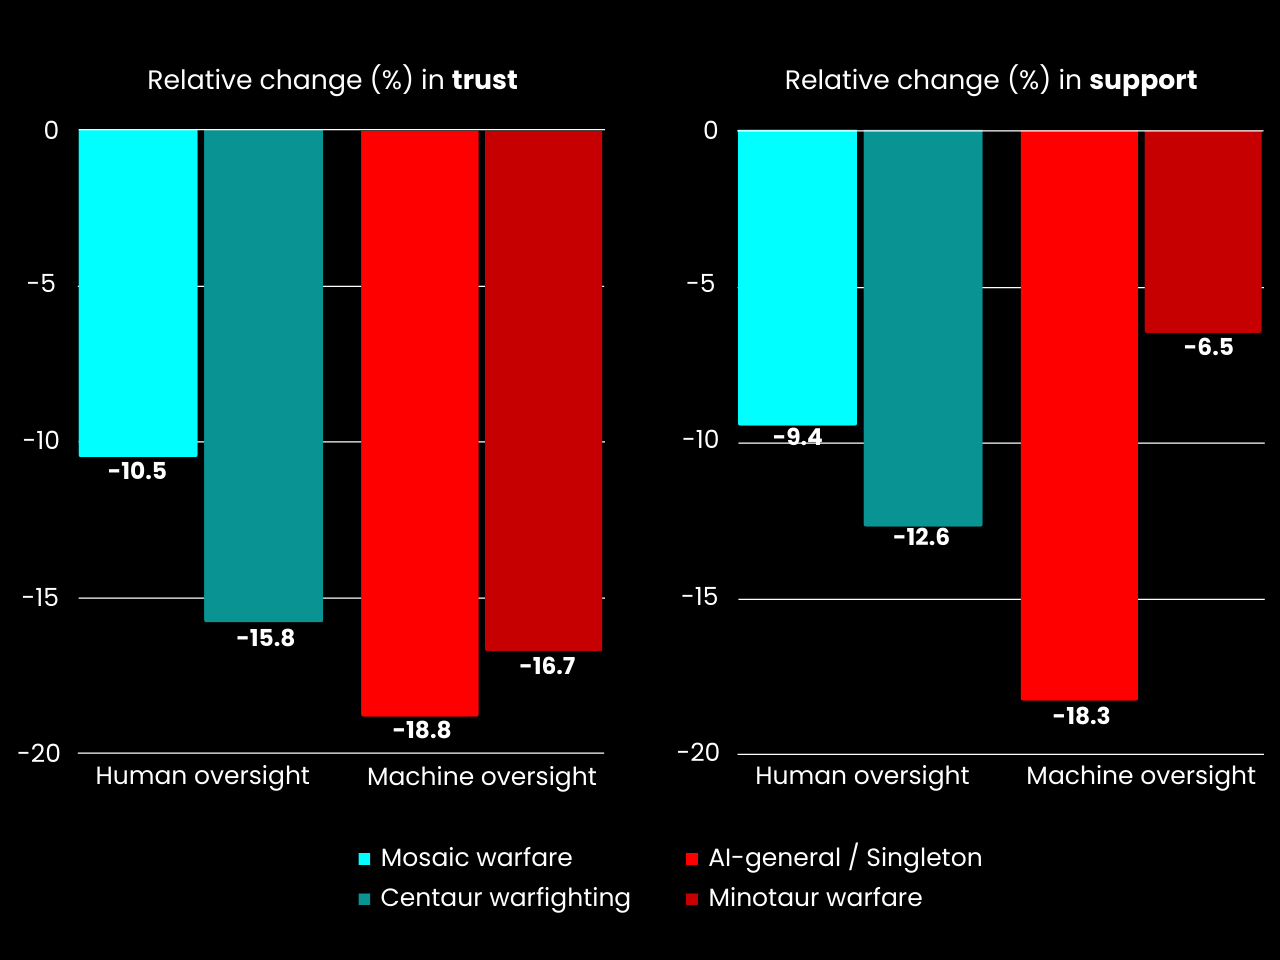 <strong>Figure 1.</strong> Trust and support relative to the baseline group for the four types of AI-enabled warfare. Note: Values represent changes in levels of support and trust for AI-enhanced military technologies by treatment groups compared to the baseline group. When the levels of support and trust drop compared to the baseline group, the values are negative. (Data: Paul Lushenko. Visualization: François Diaz-Maurin)